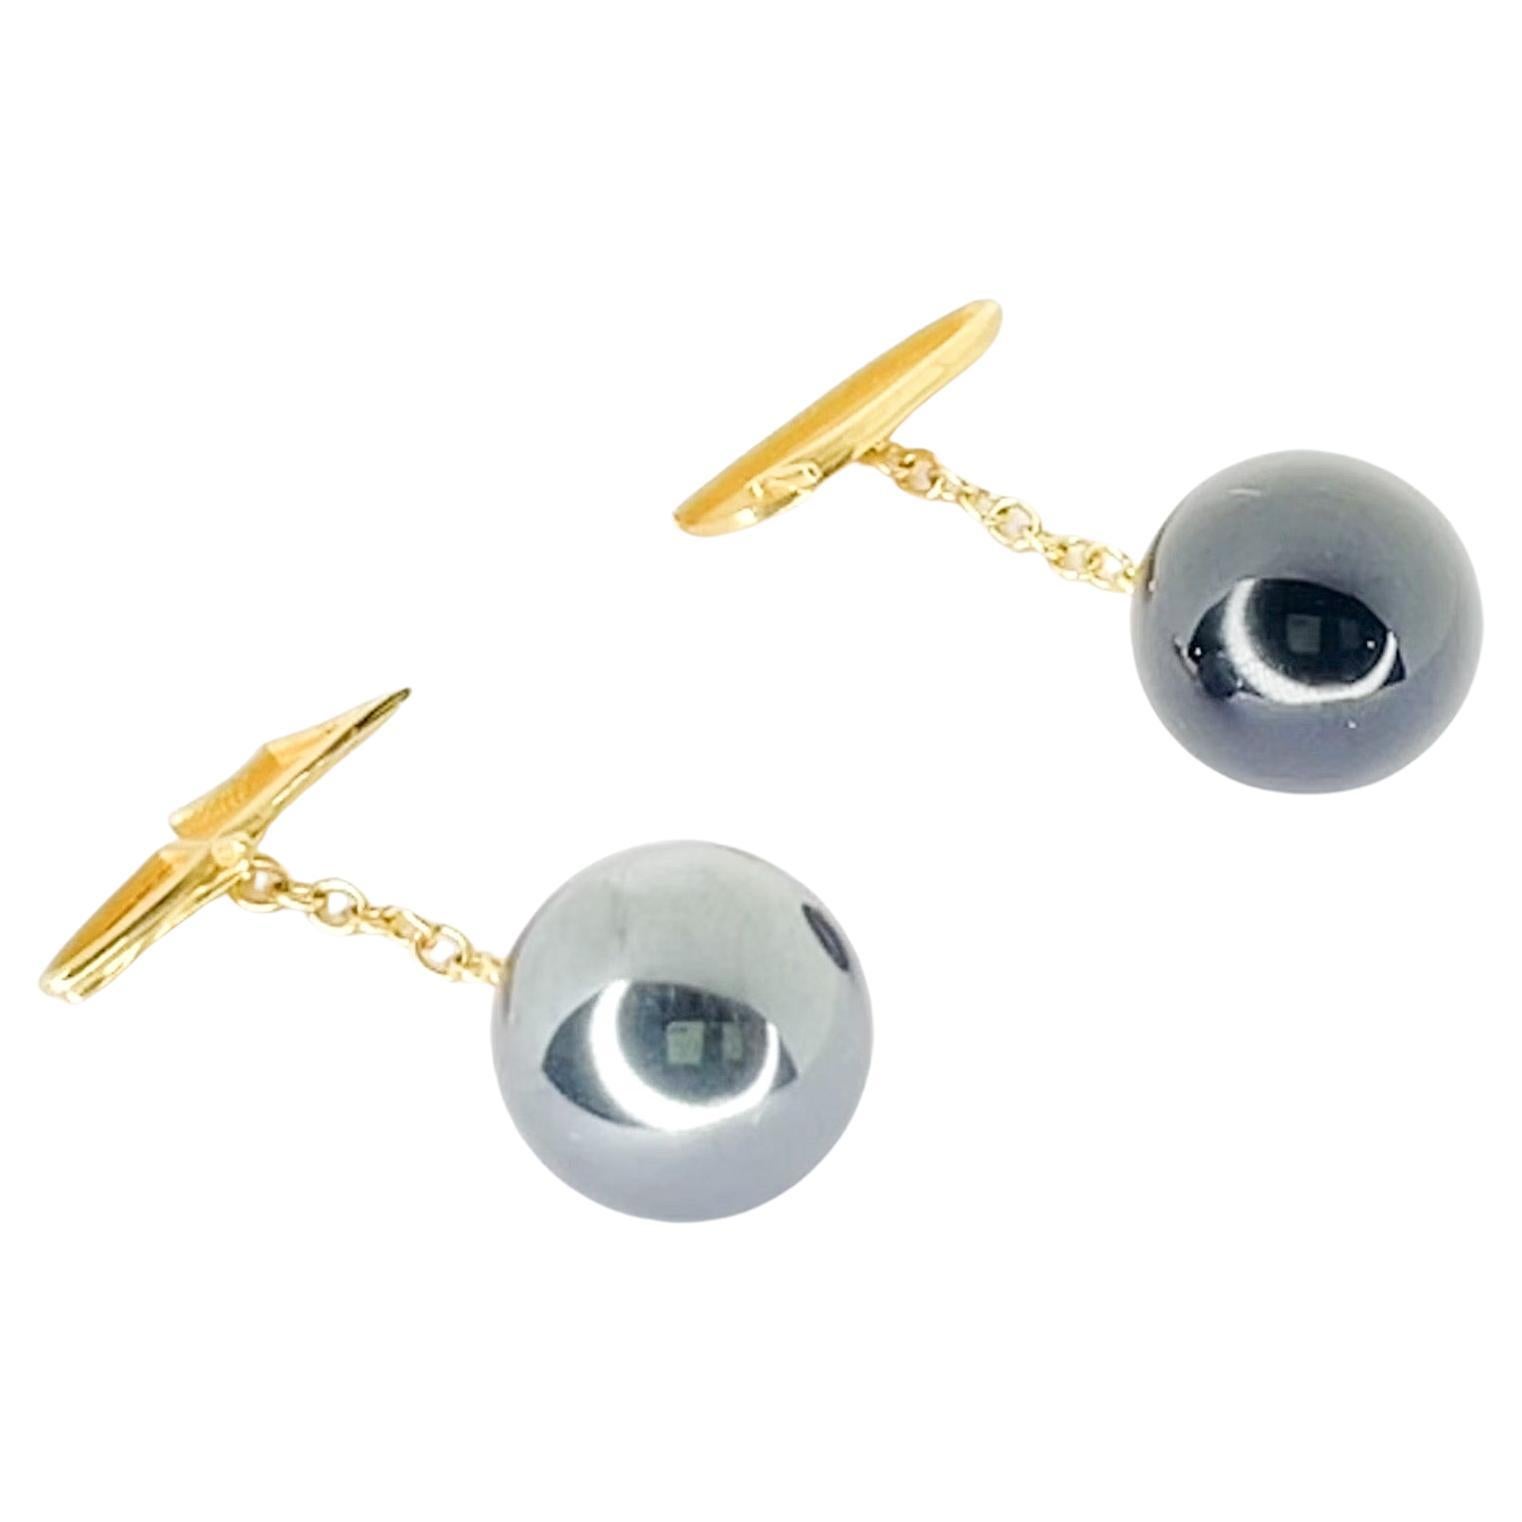 Made in Italy 18K Yellow Gold Bespoke Onyx Hematite Talisman Cufflinks for Energetic Balance.
The Fulvio's energetically balancing talisman gold cufflinks are completely customized.: hematite and onyx were chosen with a kinesiology test of gems and